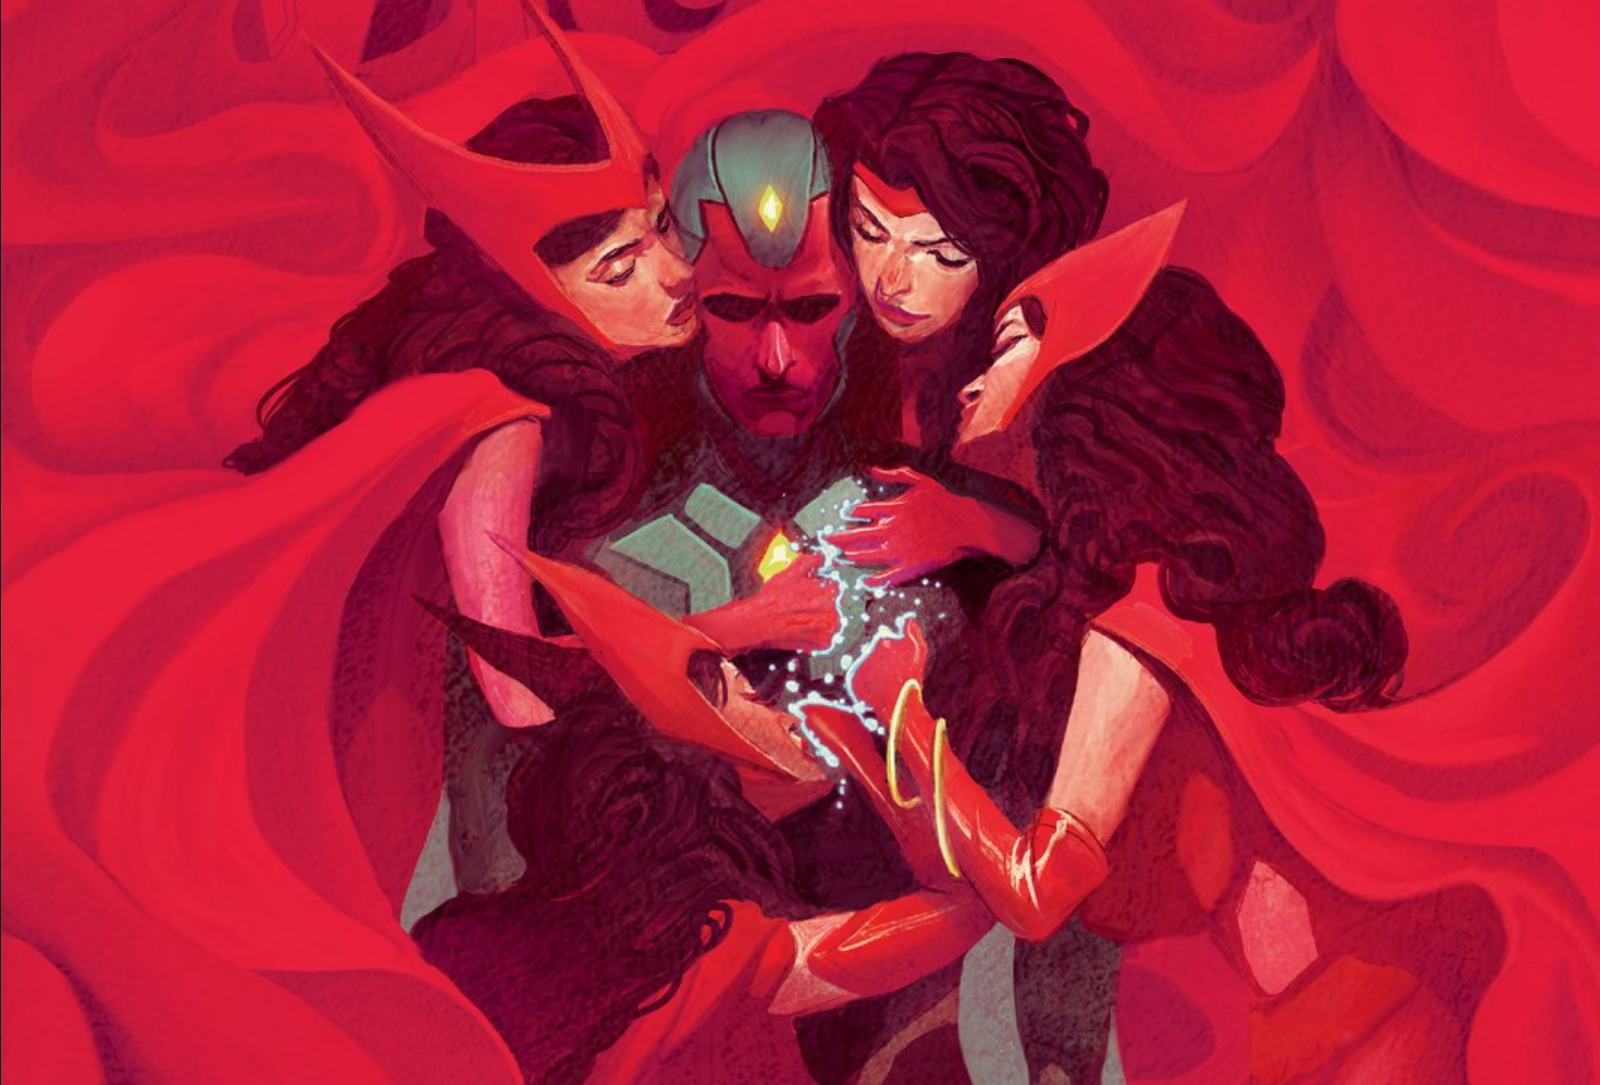 Scarlet Witch (Wanda Maximoff) In Comics Powers, Enemies, History